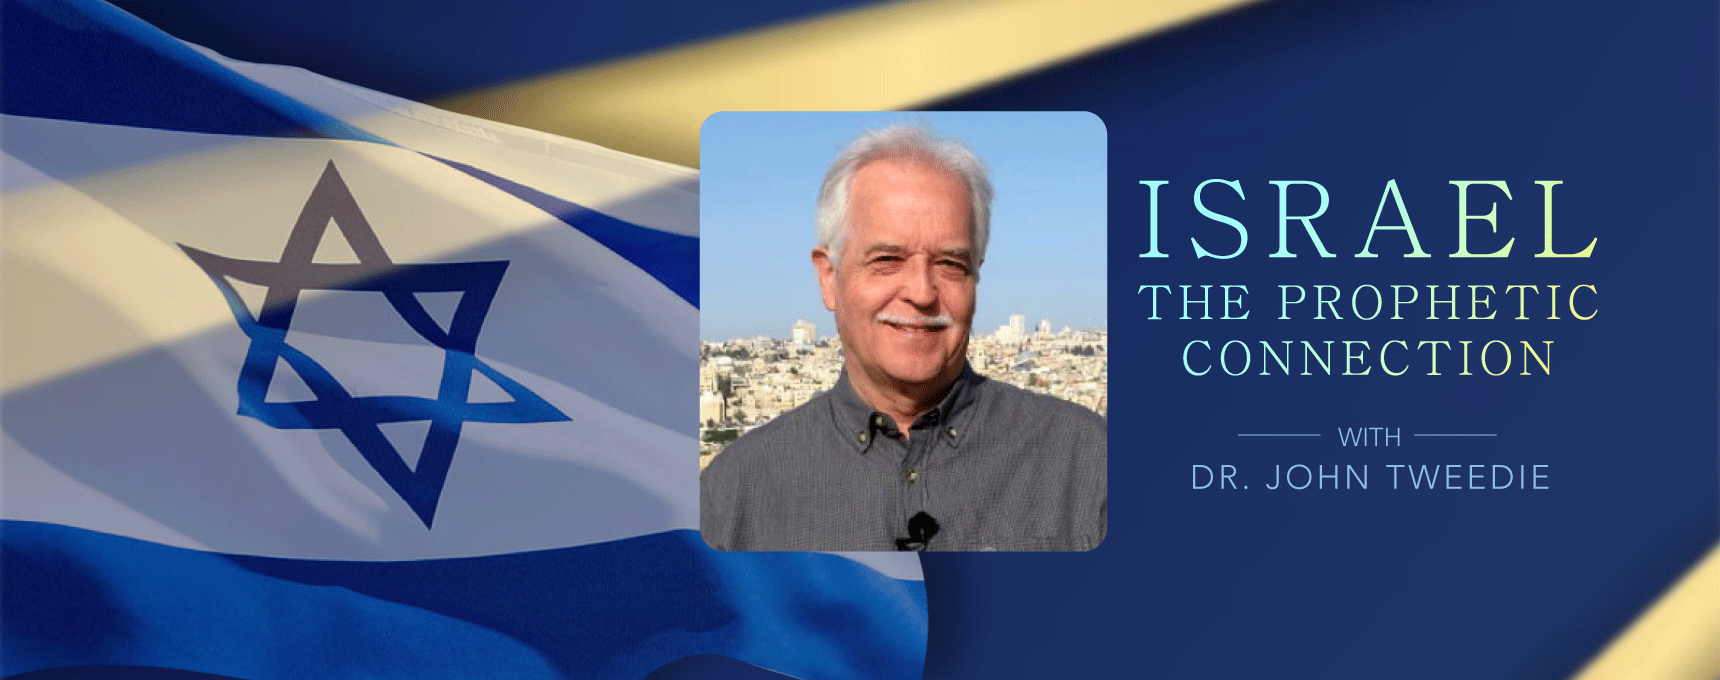 Israel-The-Prophetic-Connection